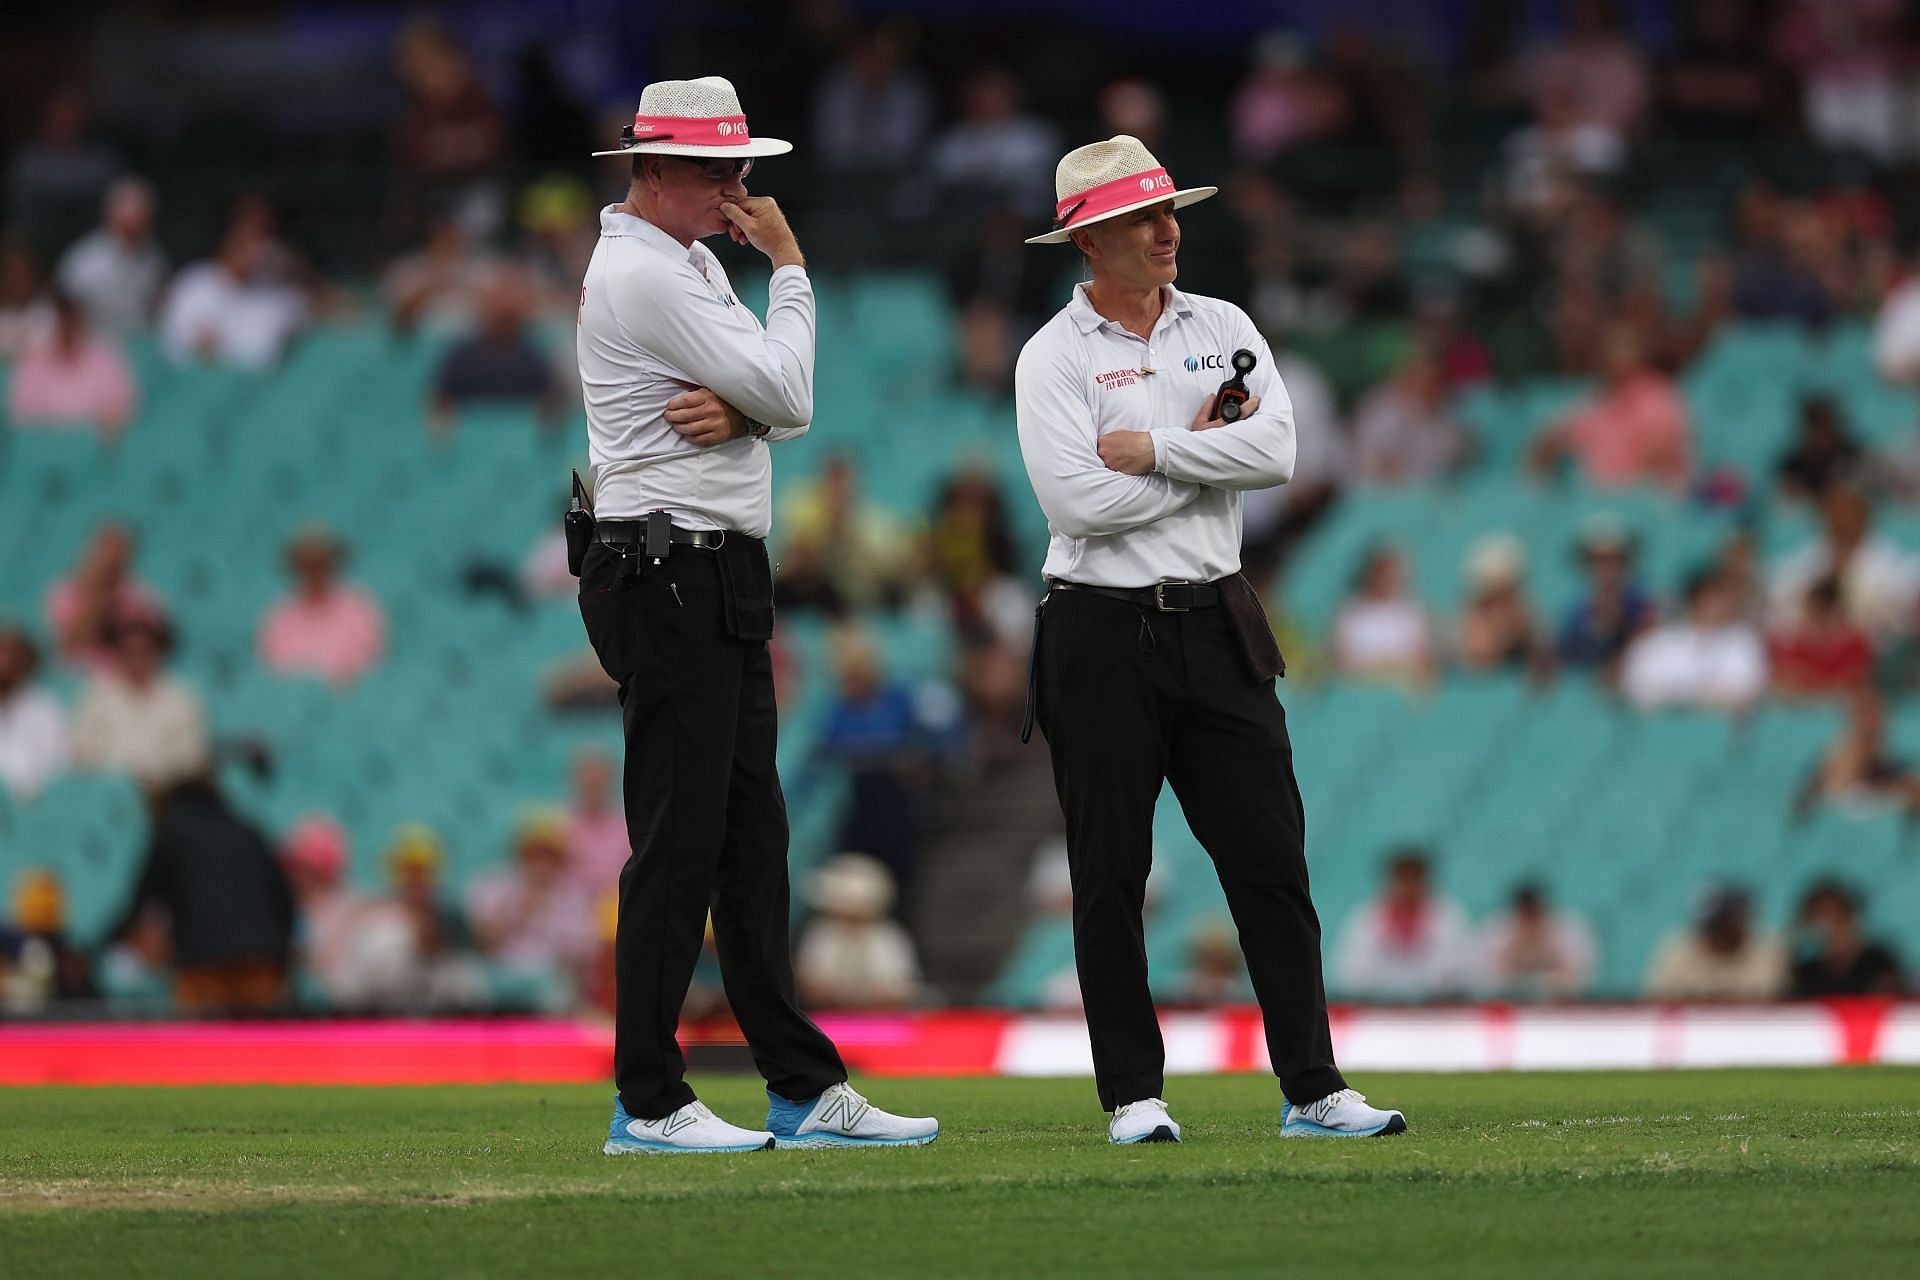 Umpires inspect conditions at the SCG. (Credits: Getty)